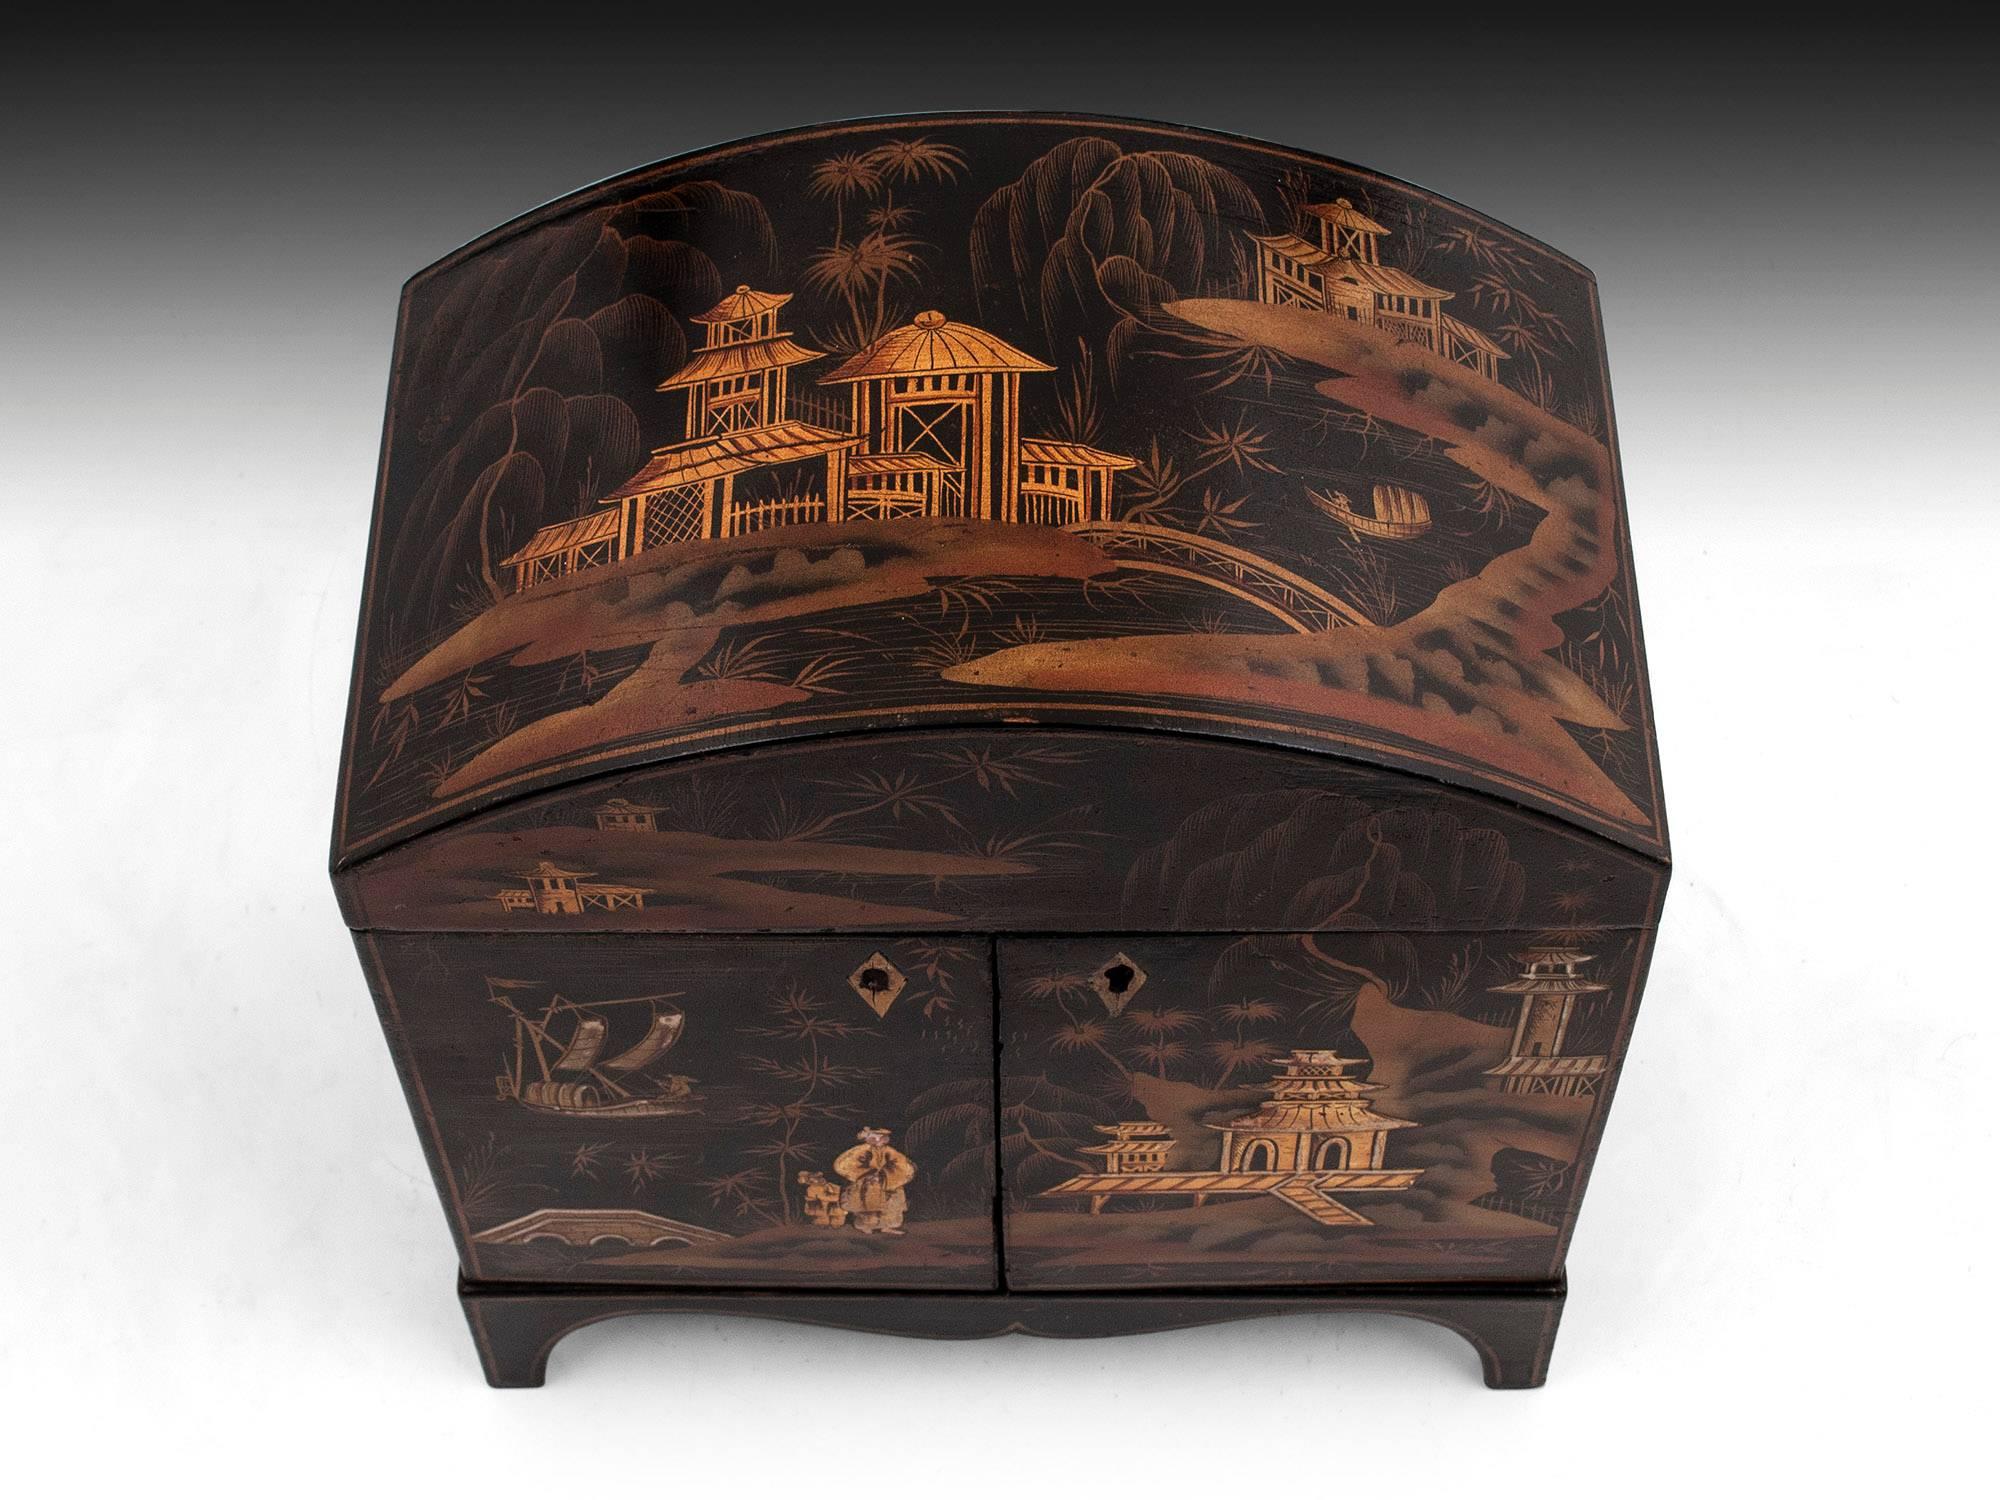 An early 19th century japanned sewing cabinet, with chinoiserie decoration on each side in beautiful warm tones against a contrasting black.
The lid lifts to reveal several compartments for thread spools, pincushion, thimbles and further storage.